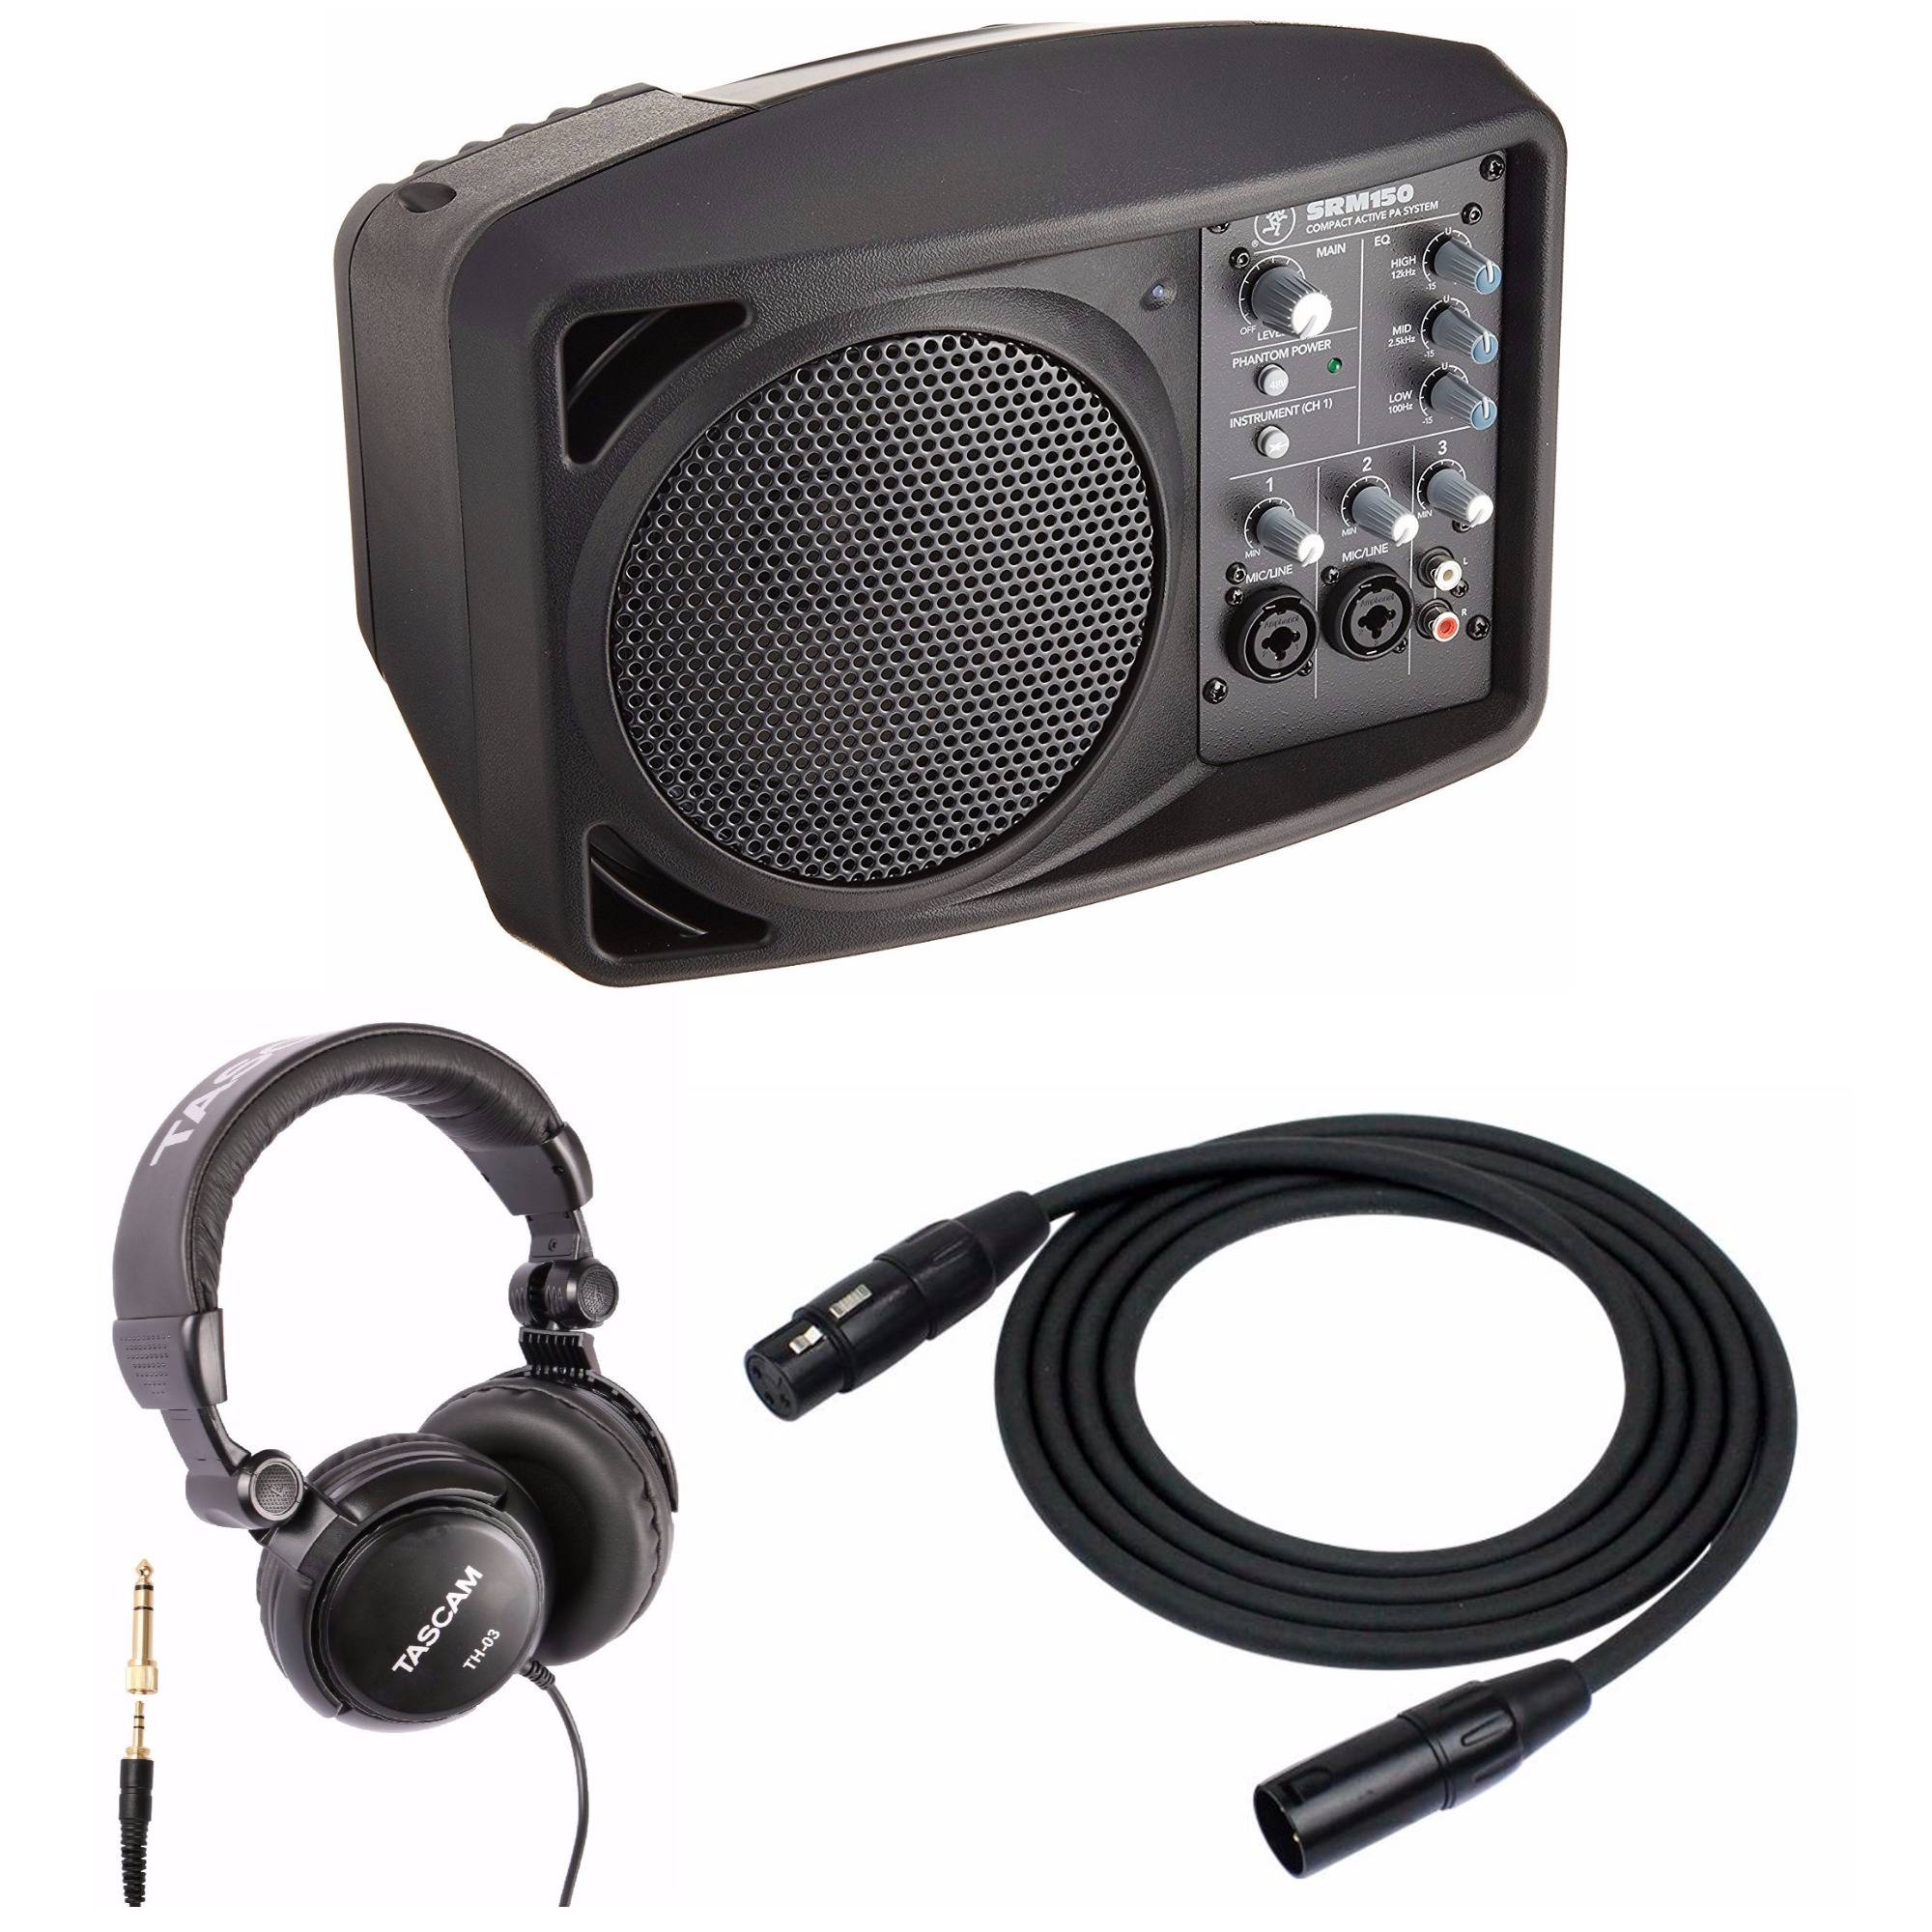 Mackie SRM150 5.25-Inch Compact Powered Active PA System Bundle with XLR Microphone Cables and Full-Sized Headphones